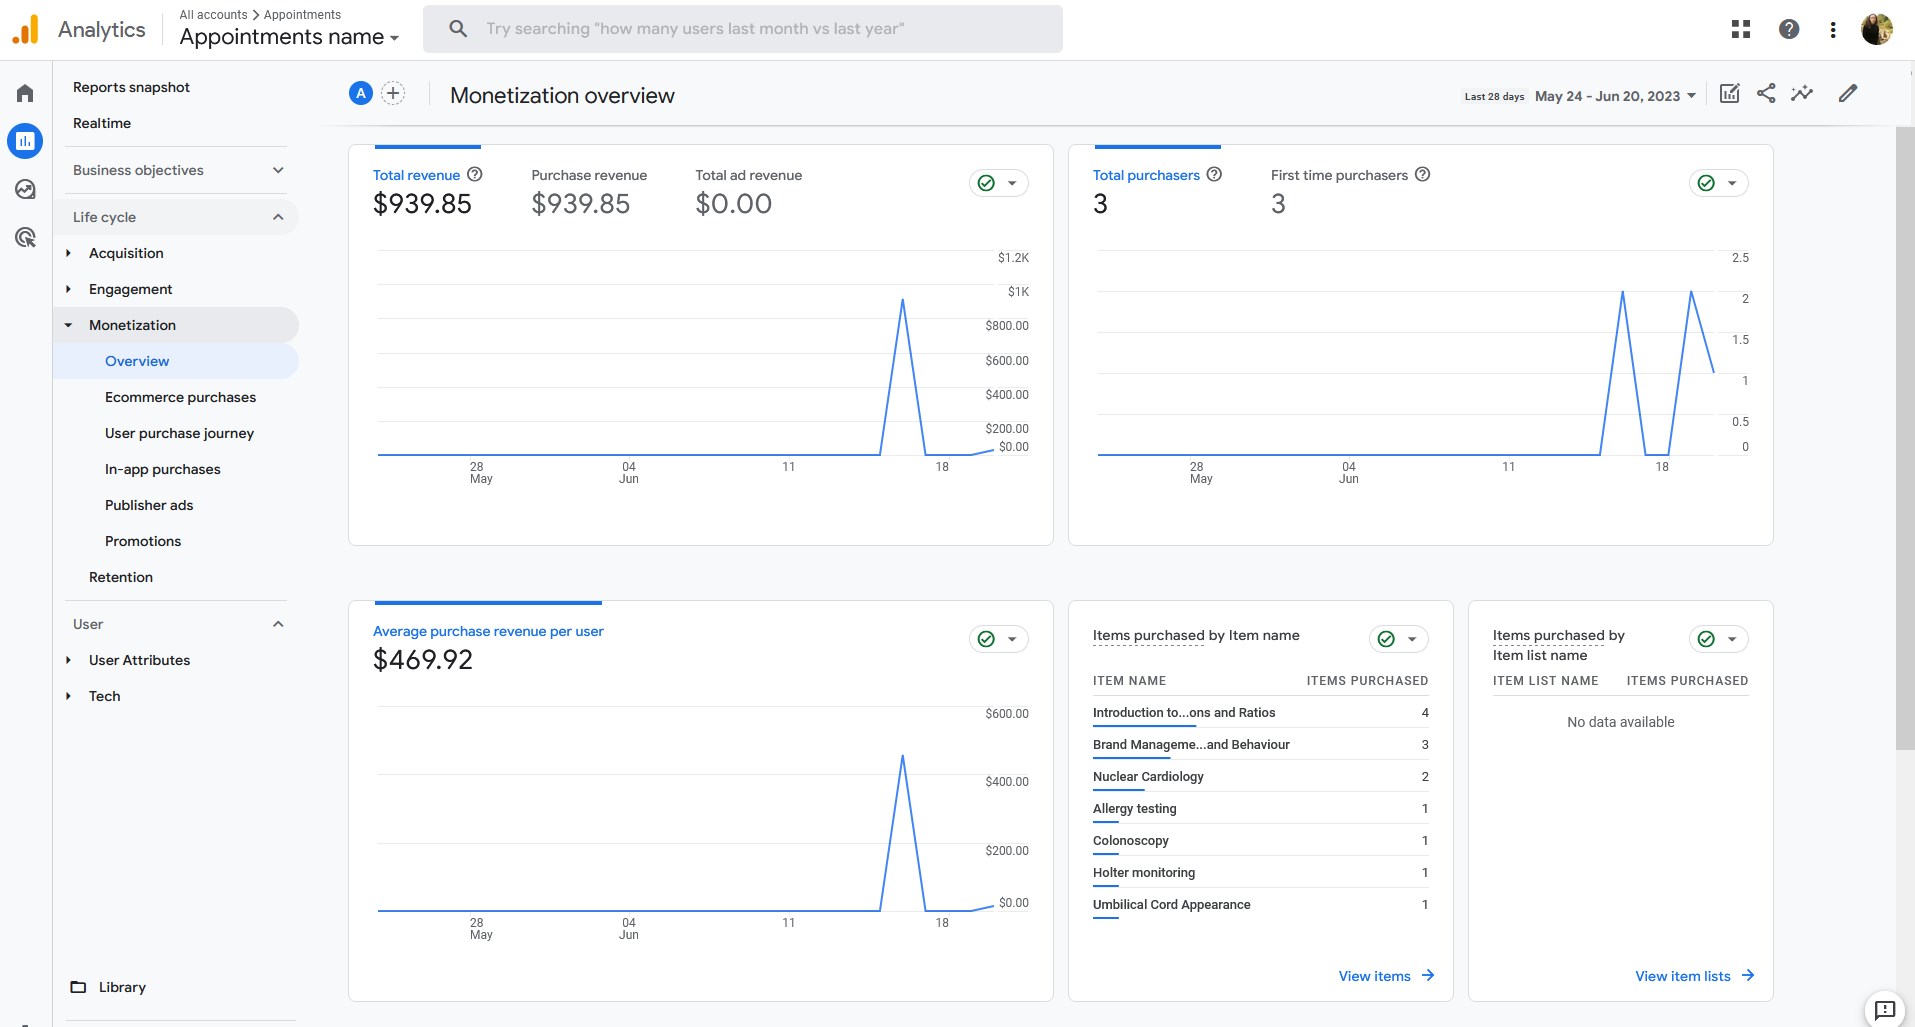 Ecommerce purchases overview in Google Analytics 4.